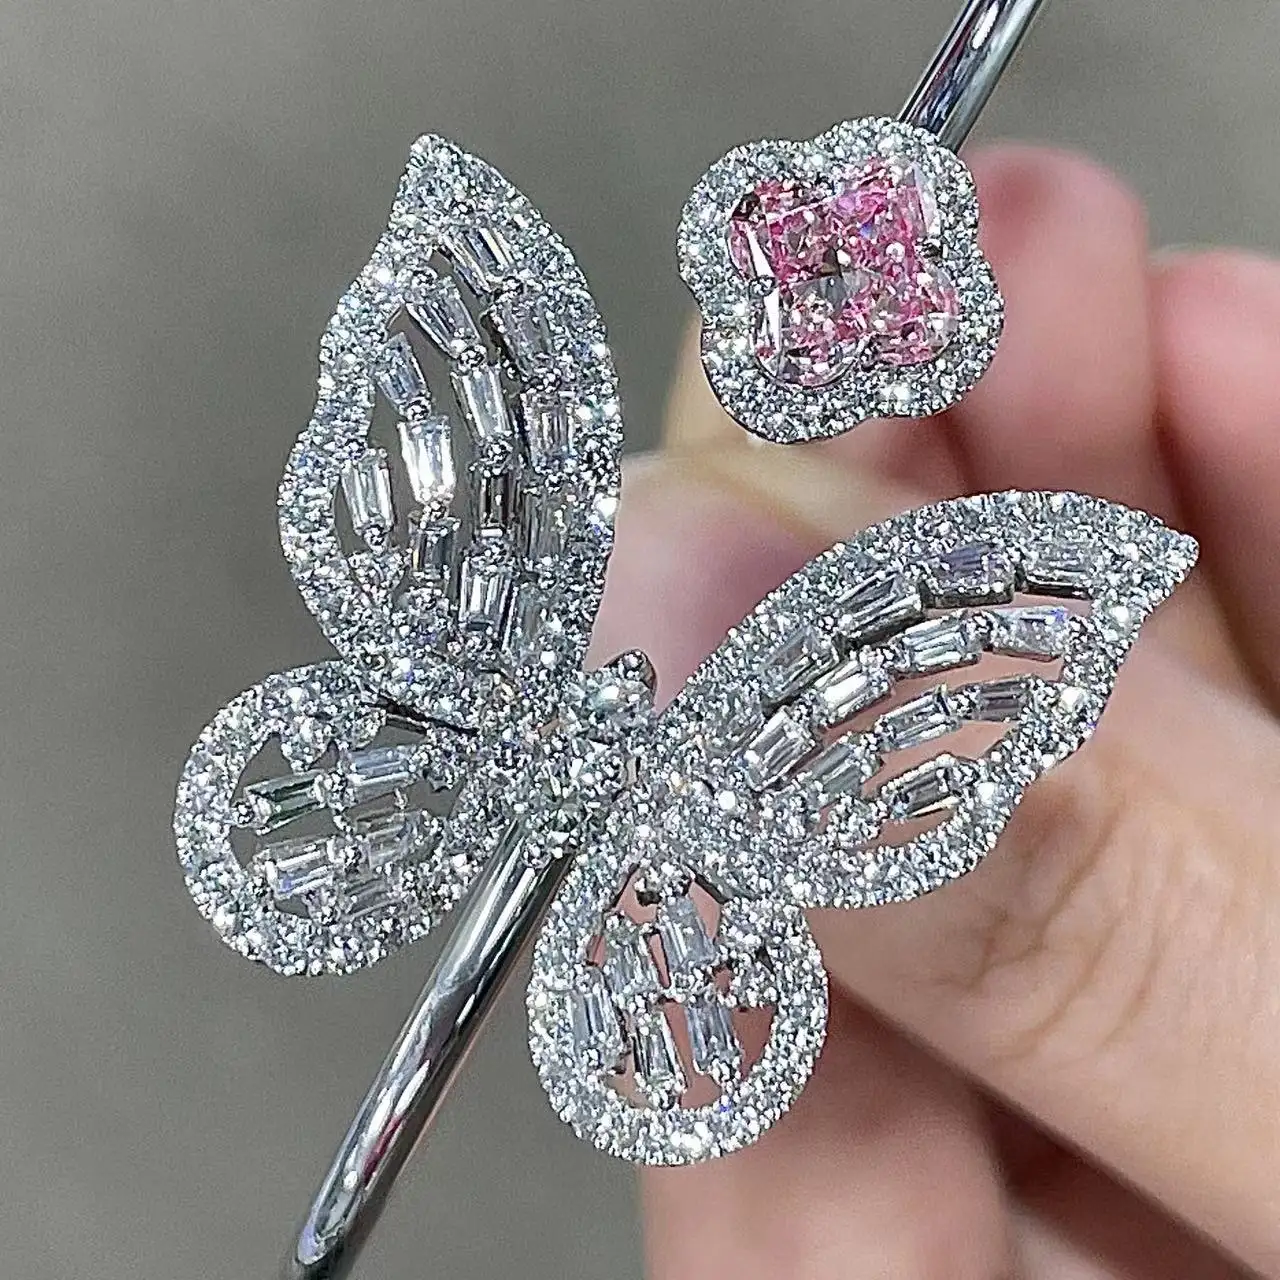 CVD Four Leaf Clover Cutting 1.51ct VS1 Matched Jewelry NGTC Certificated 18K Gold Lab Grown Pink Diamonds Bracelet